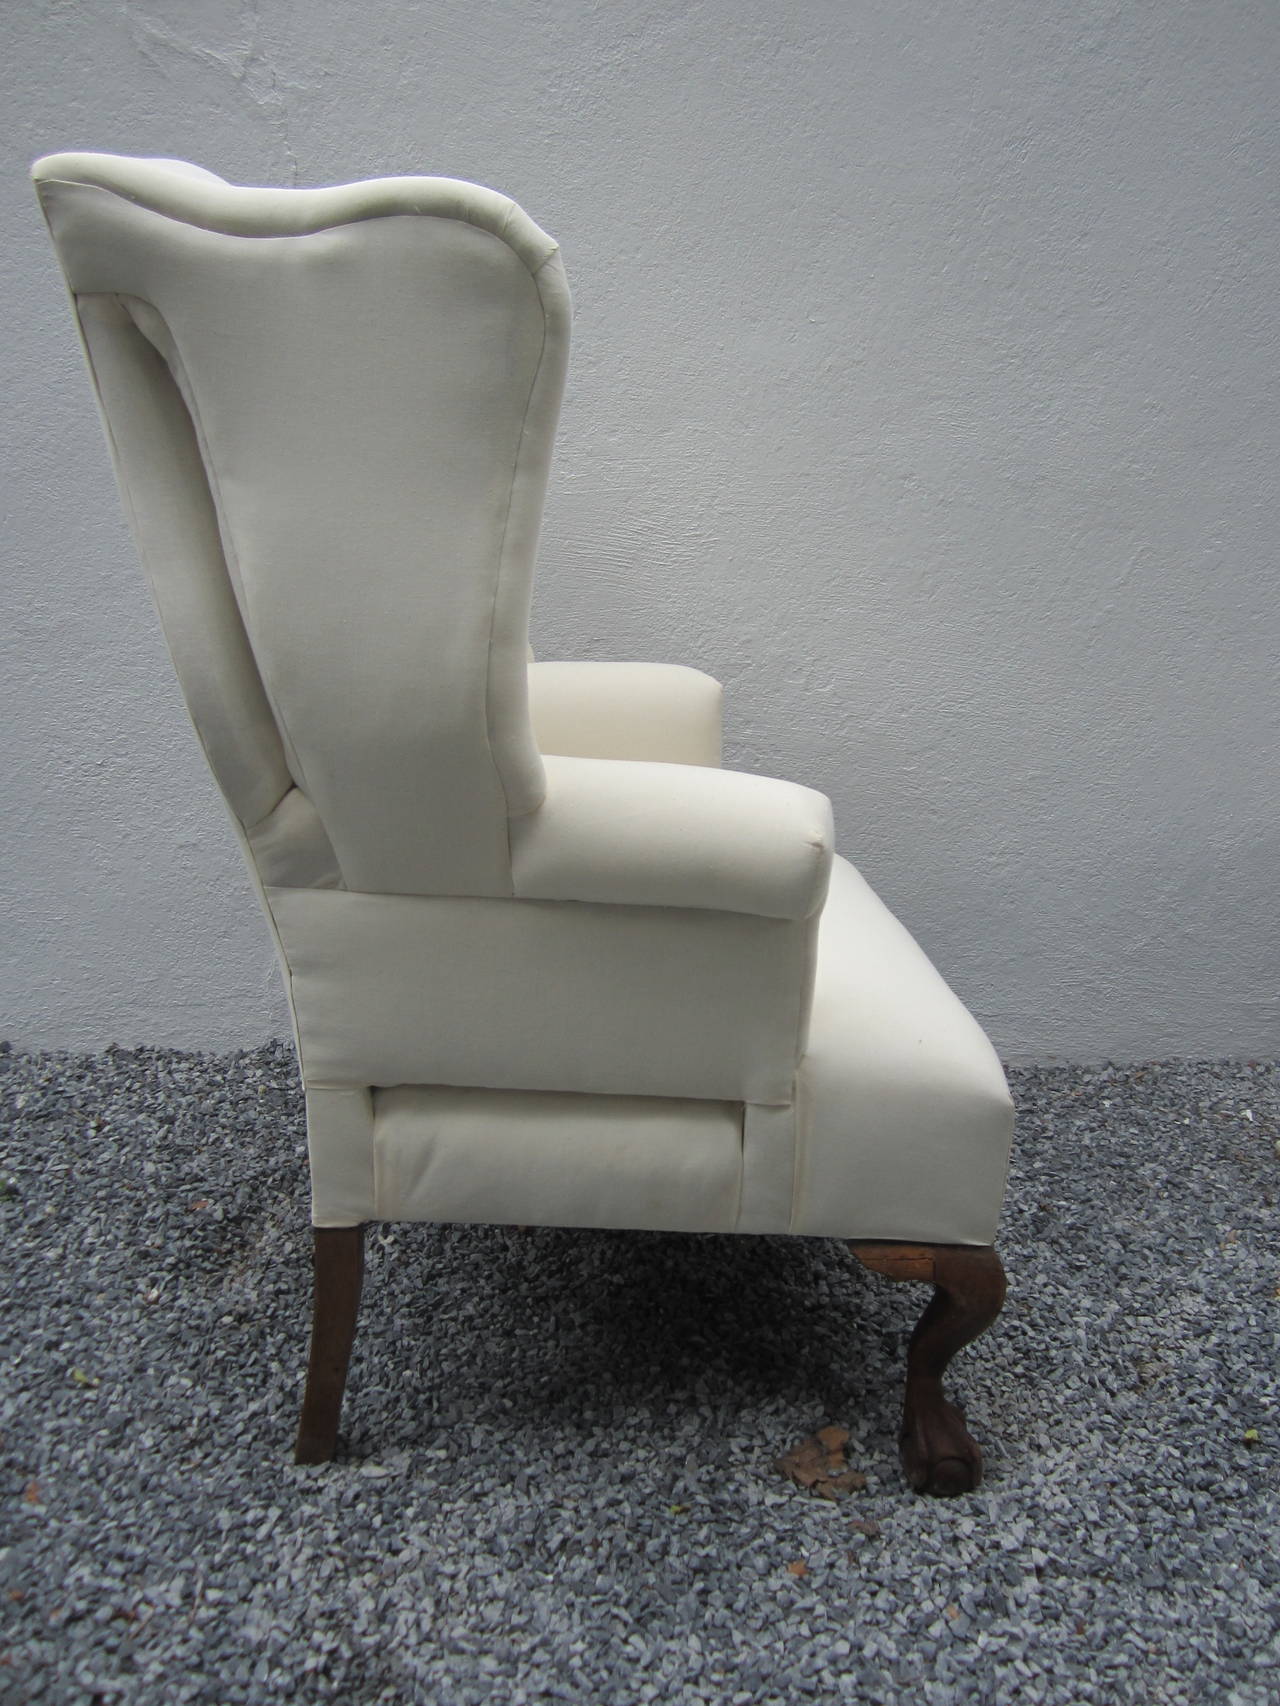 Handsome 19th century wing chair....newly upholstered in muslin.....beautiful ball and claw front legs.....ready for fabric over muslin or leave as is.....great silhouette.....